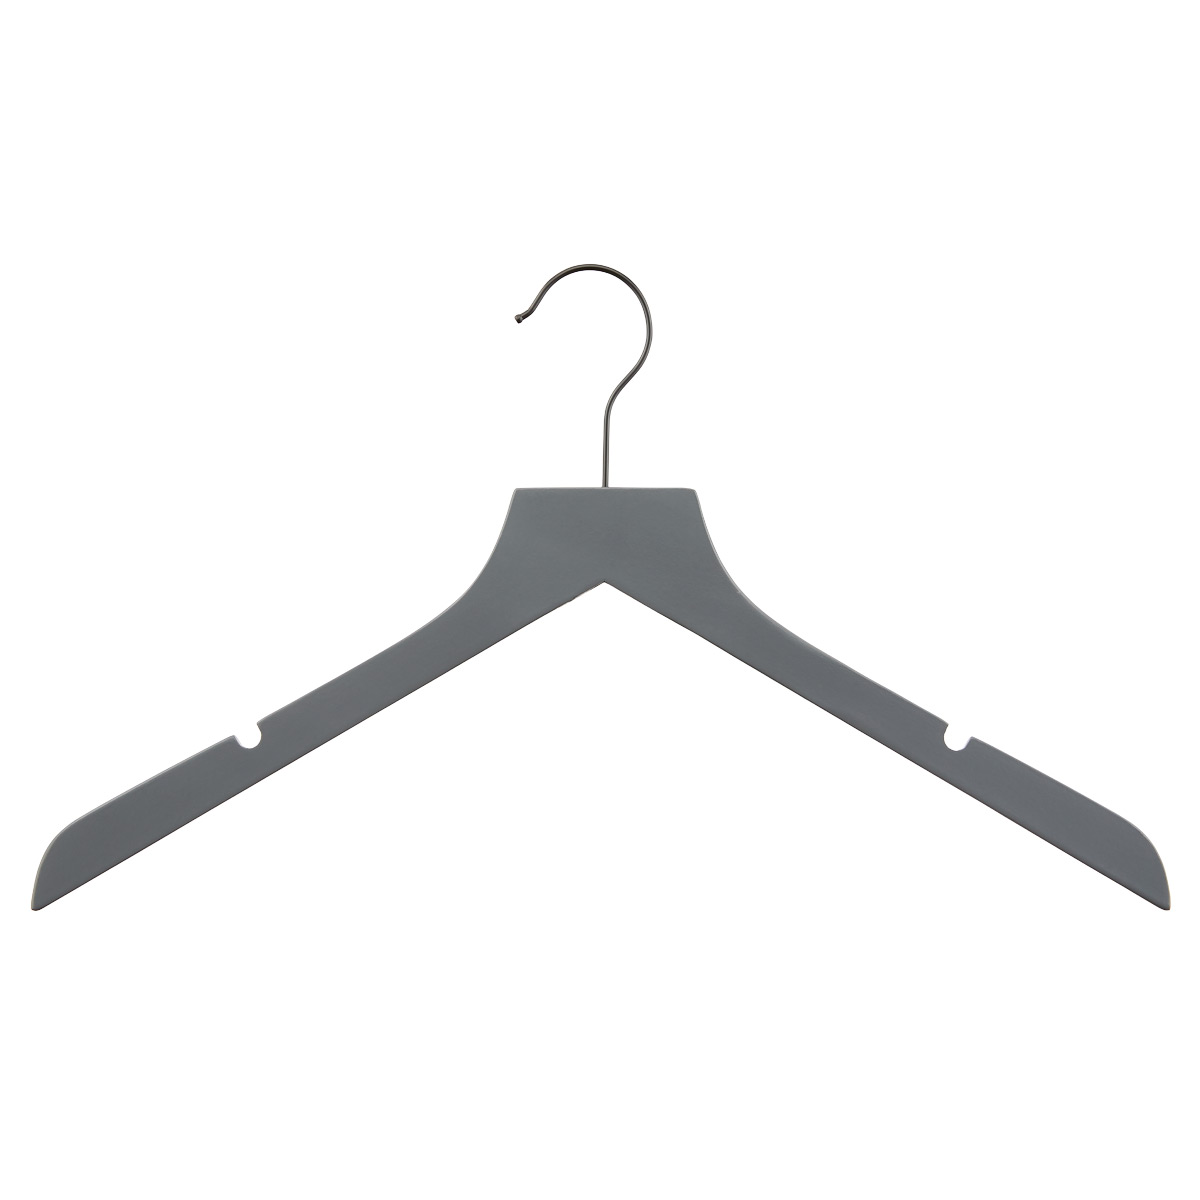 The Container Store Slim Wood Hangers with Notches